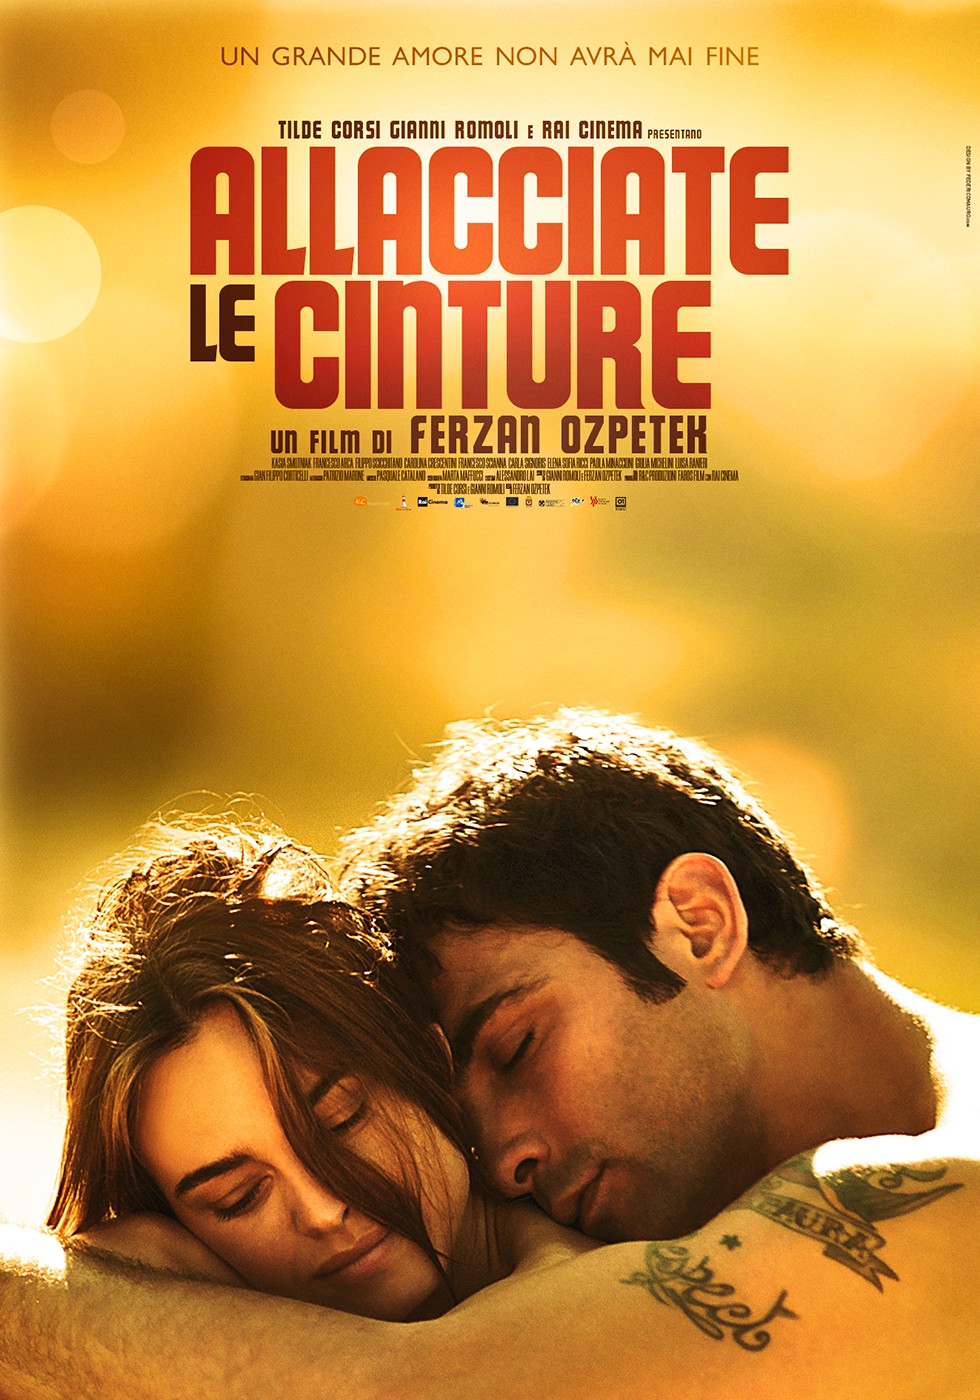 Extra Large Movie Poster Image for Allacciate le cinture 